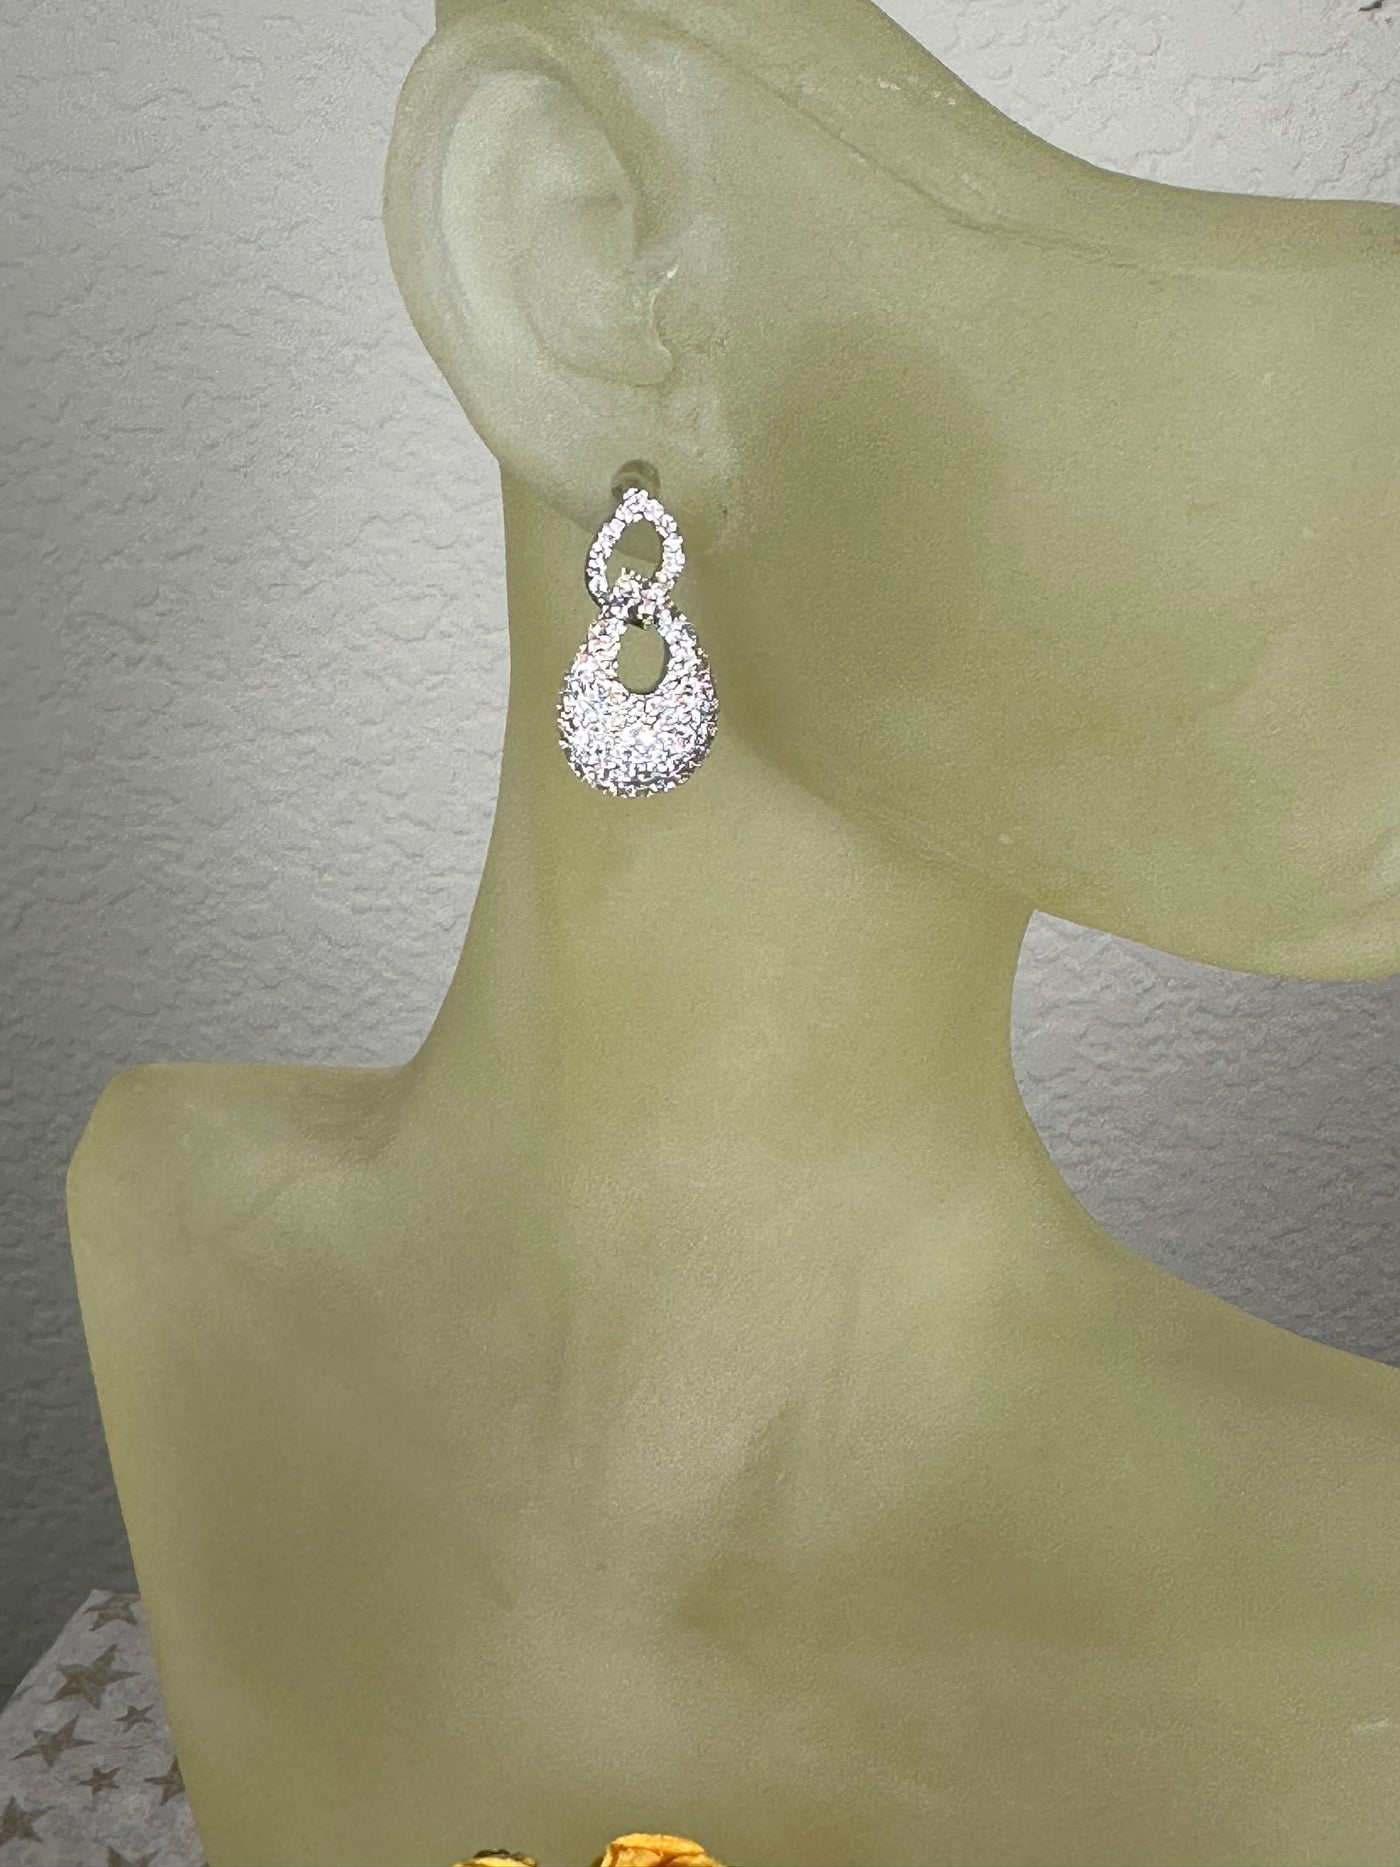 Silver Tone Artsy Double Loop Earrings Decorated with Pave Set Cubic Zirconia